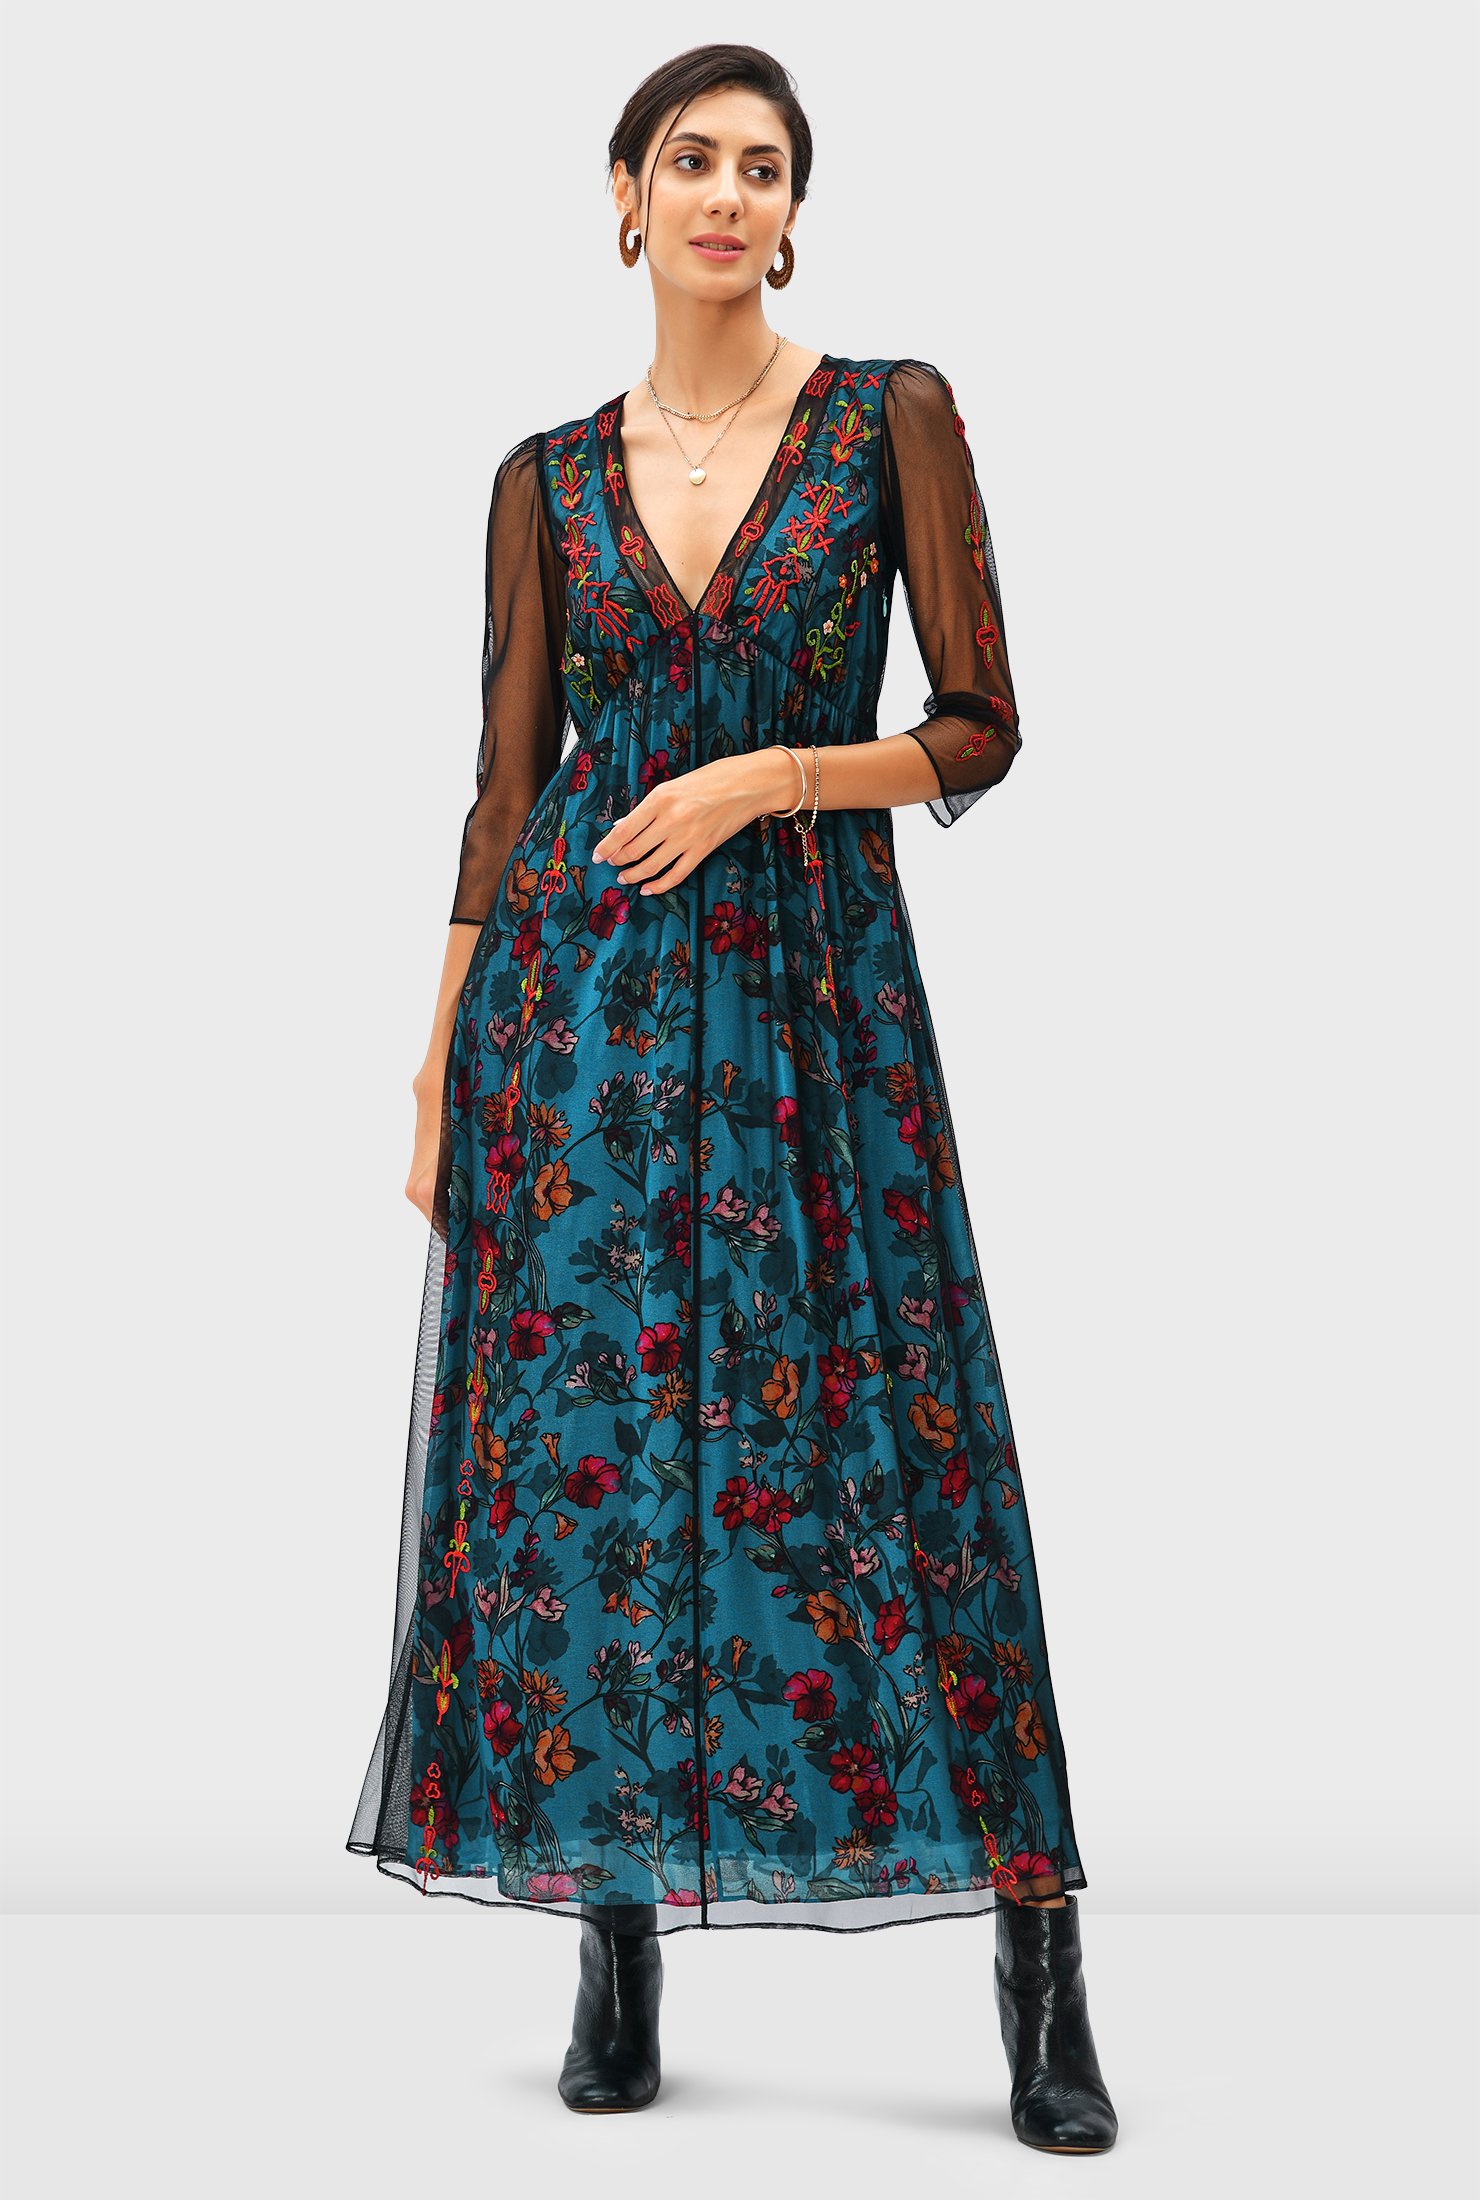 Black floral georgette dress with dupatta - set of two by Magizham | The  Secret Label